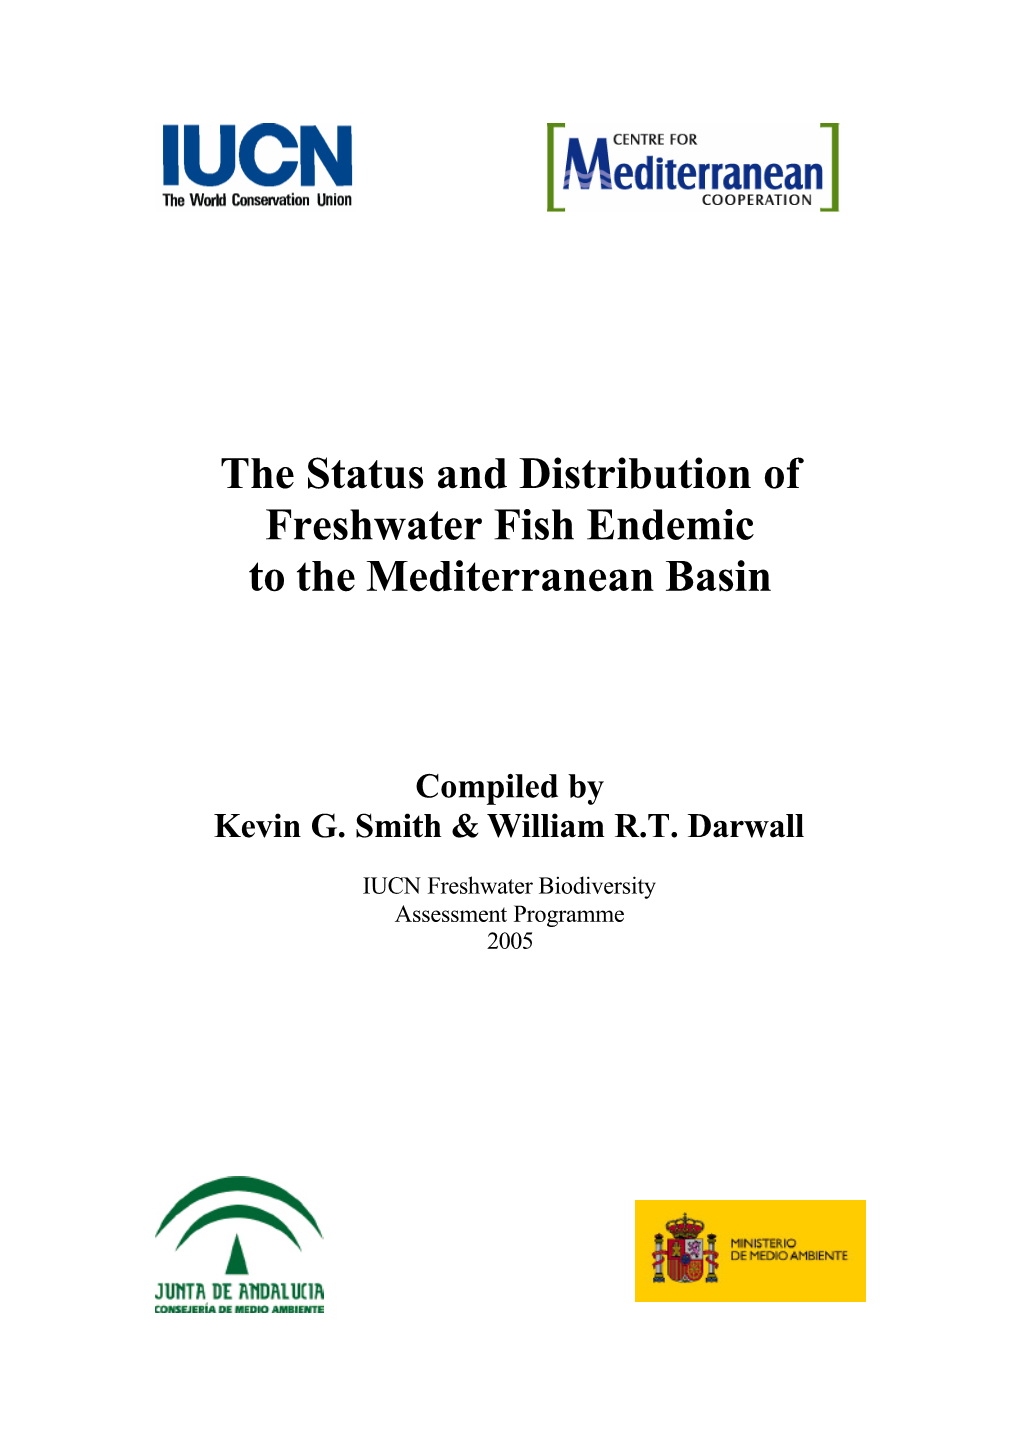 The Status and Distribution of FW Fish Endemic to the Medi…